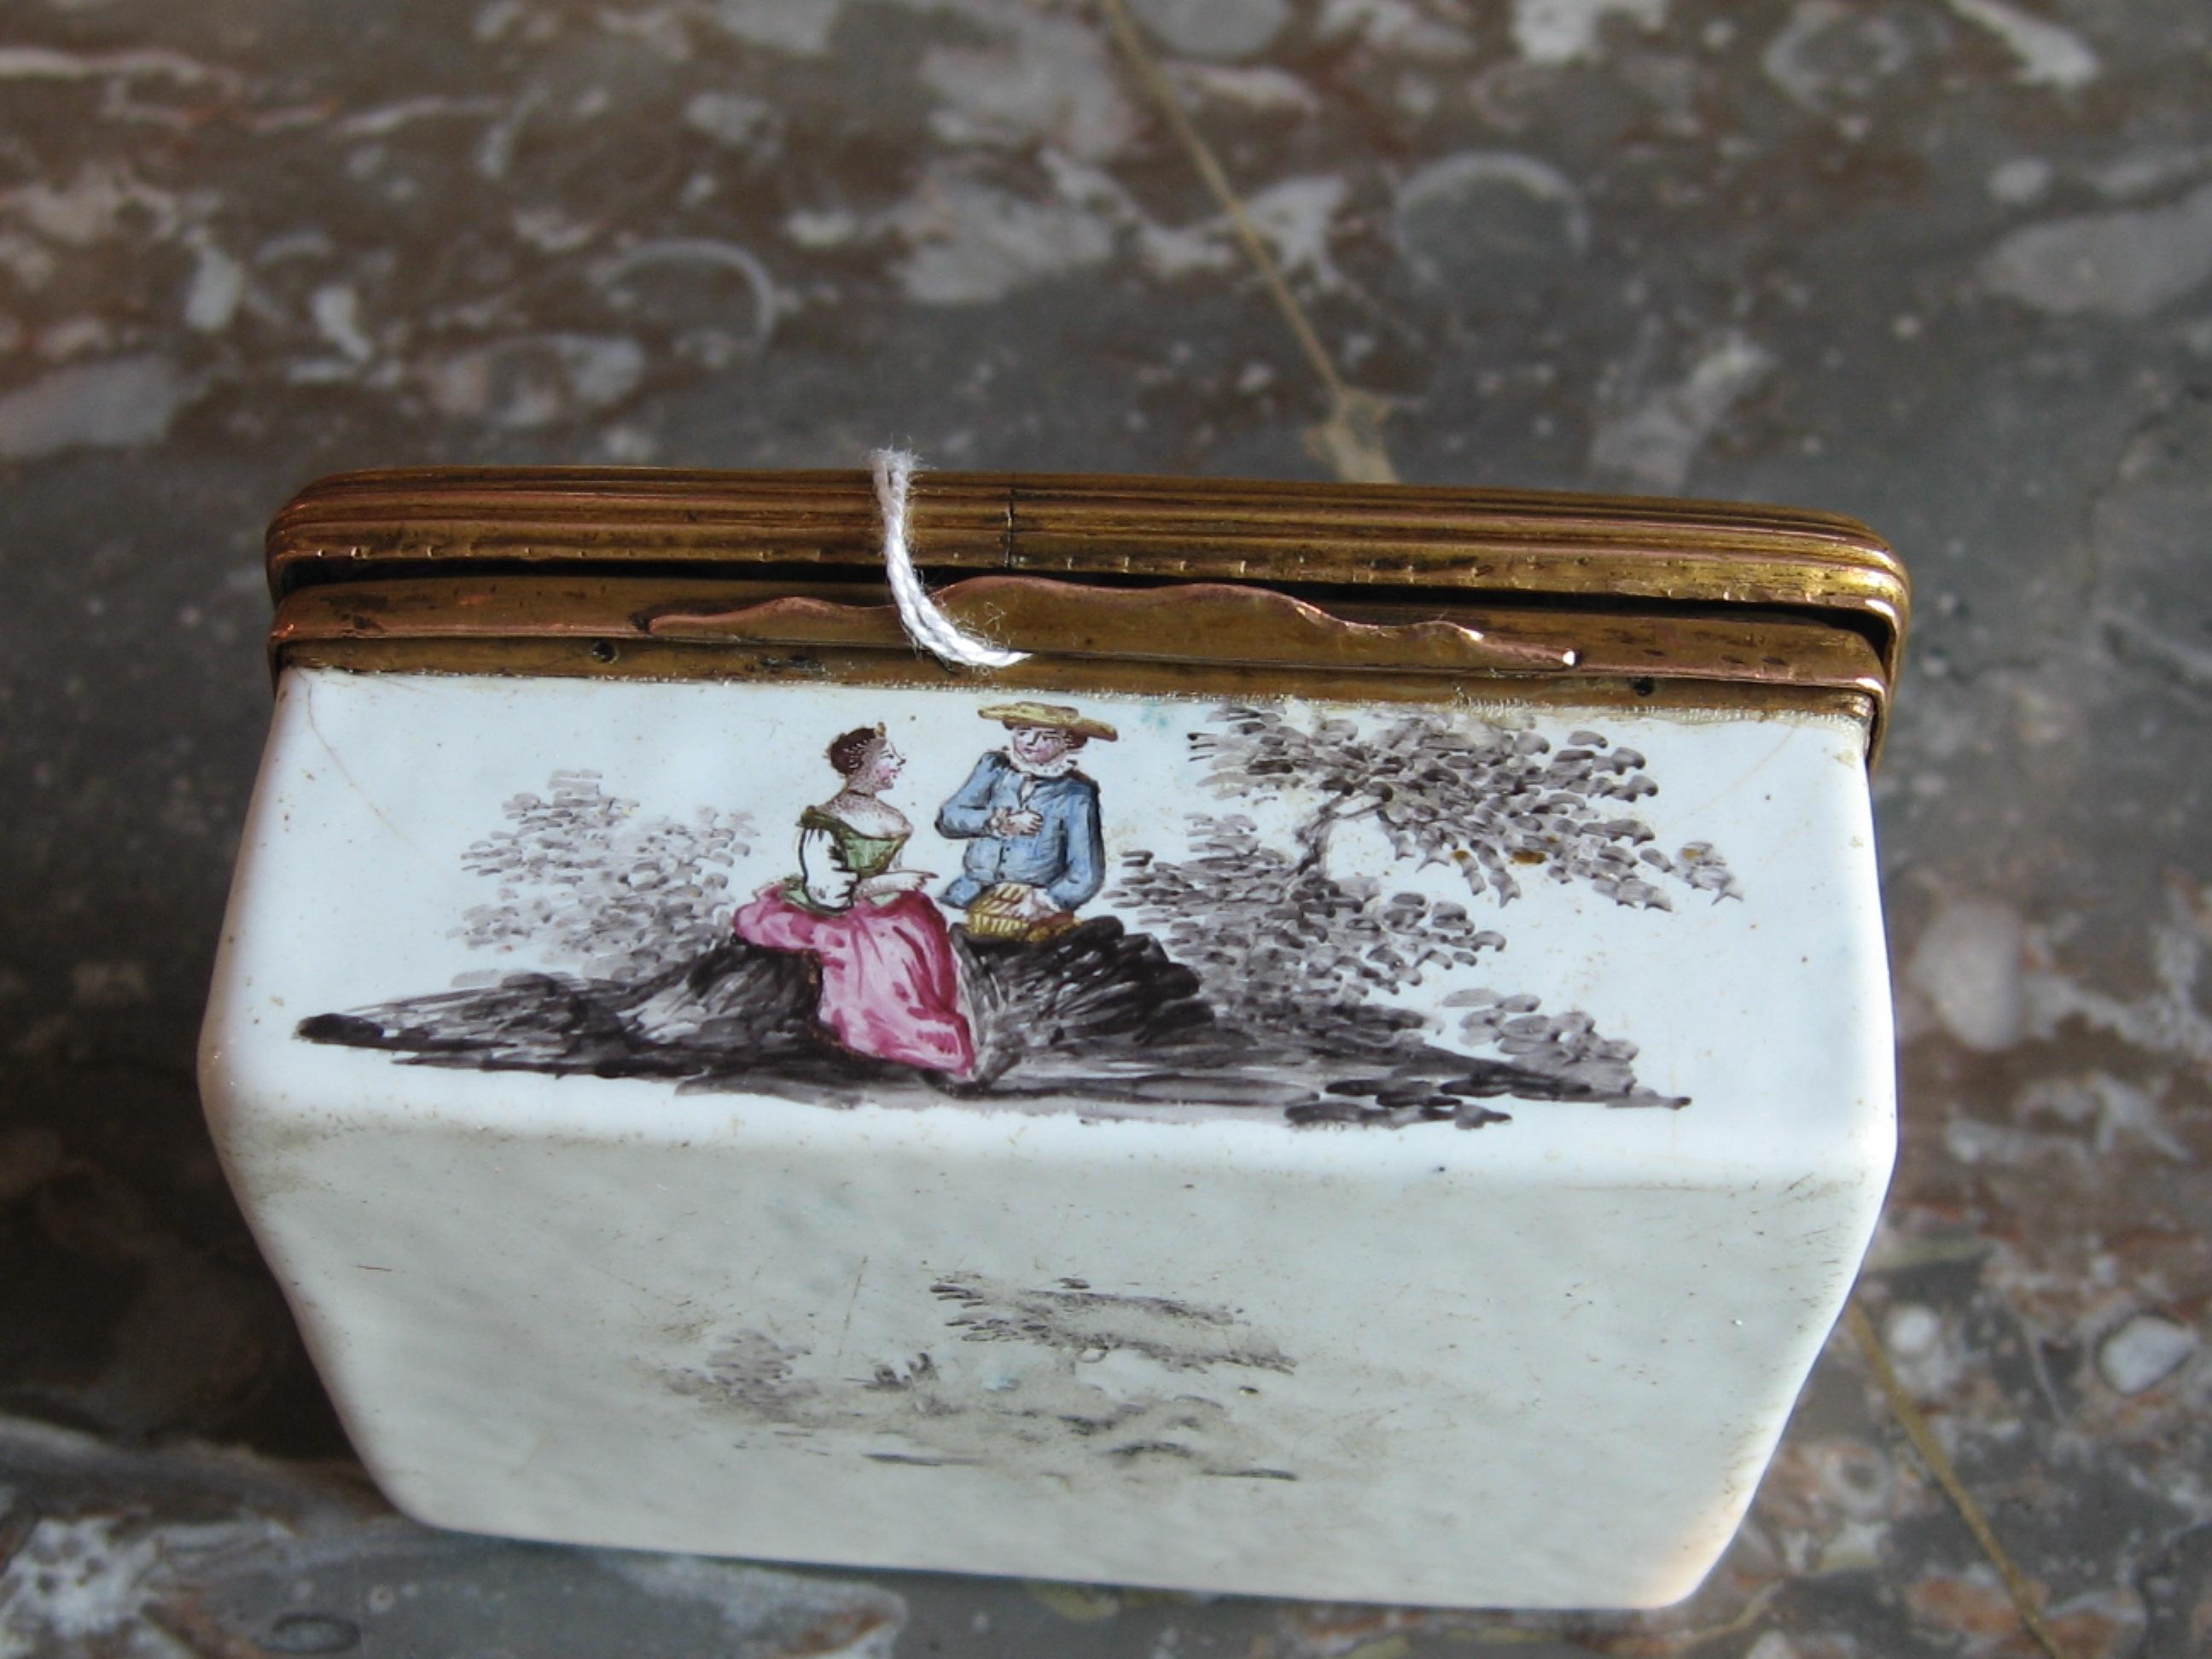 Erotic Snuff Tobacco Box with Highly Explicit Erotic Scenes Behind Secret Lid 3